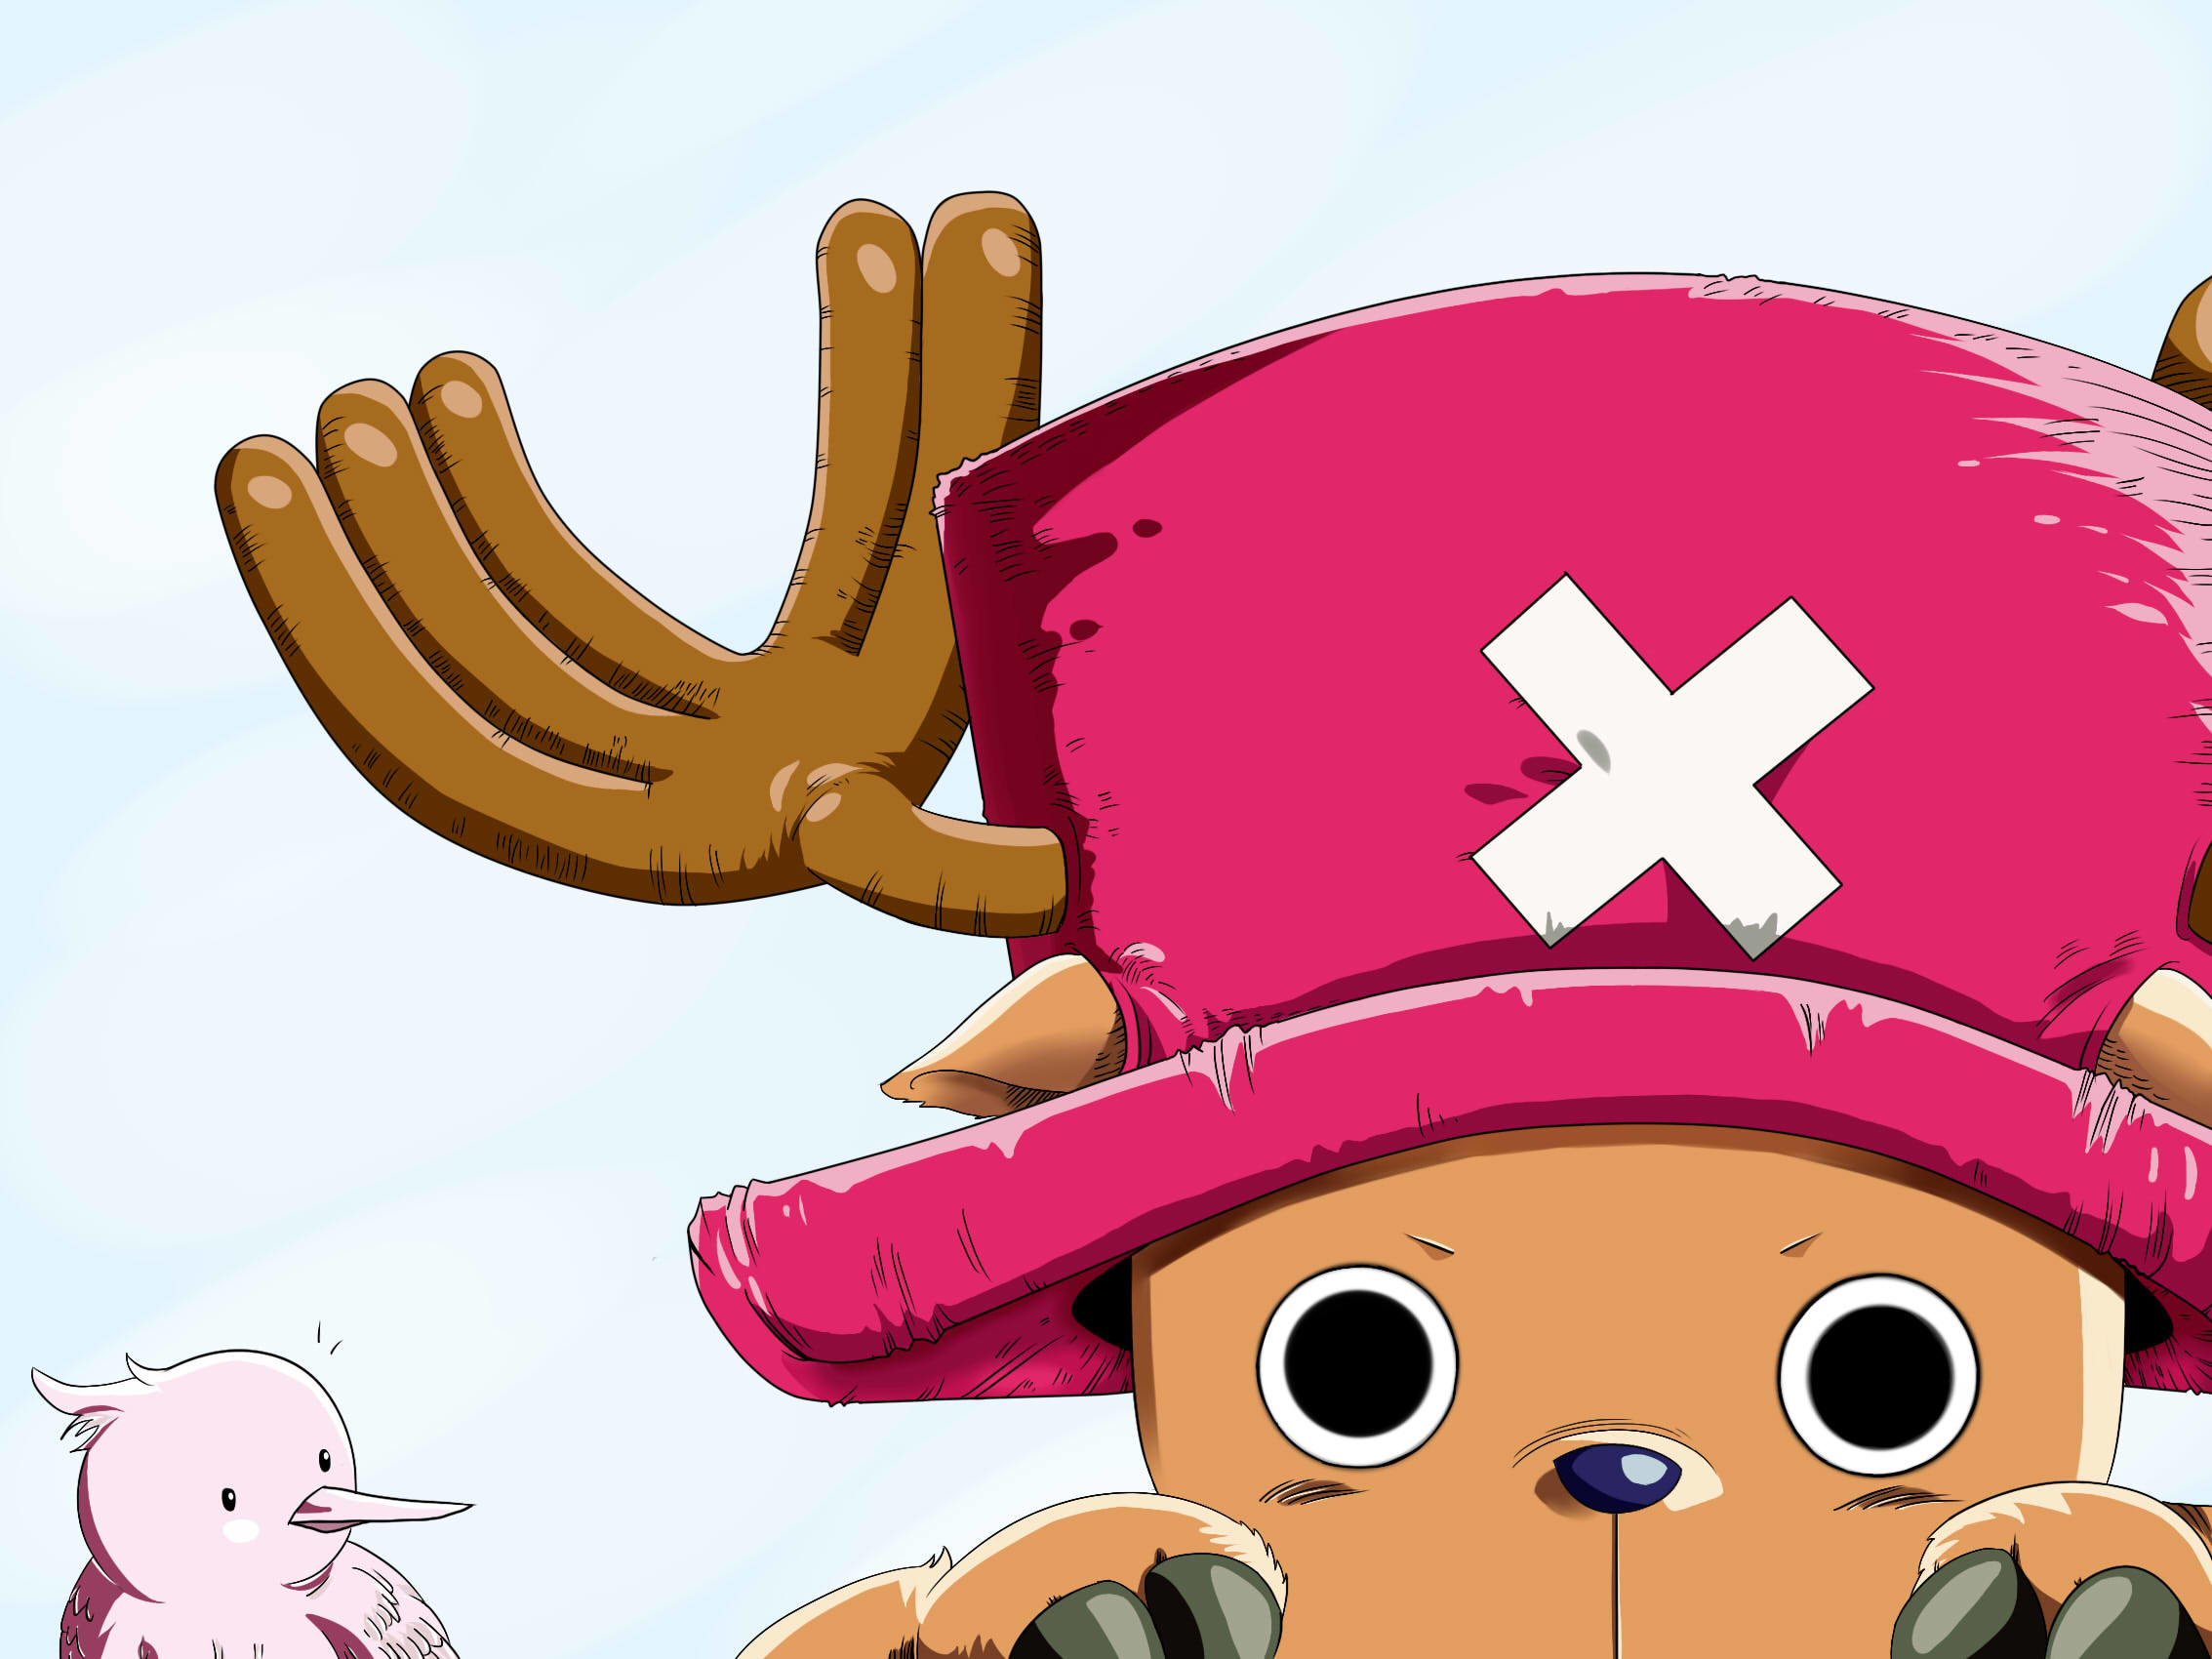 Explore One Piece Chopper, Wallpaper, and more